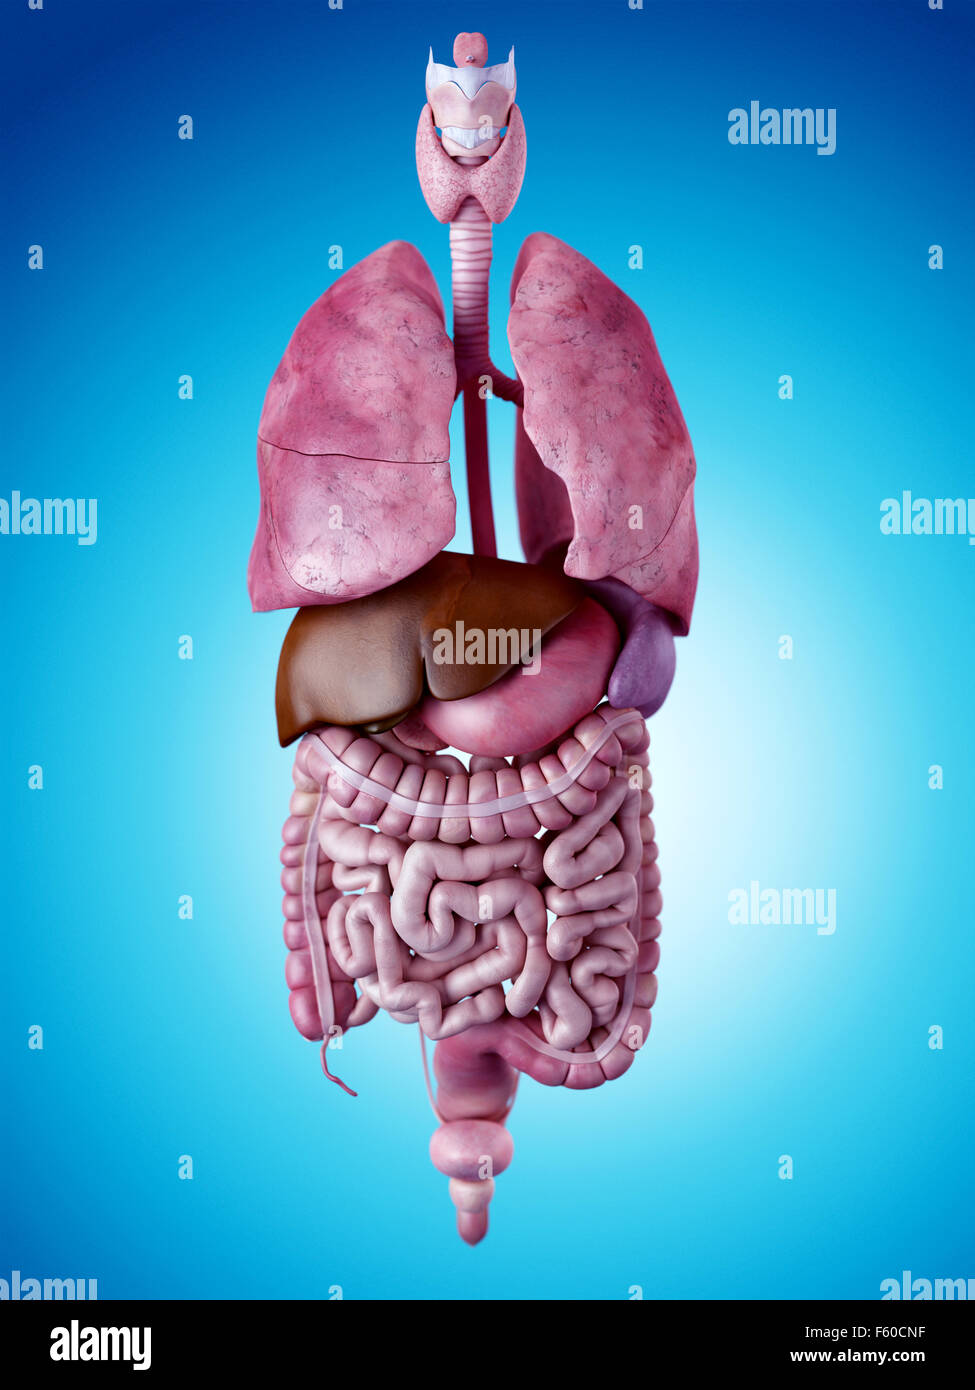 medically accurate illustration of the human organs Stock Photo